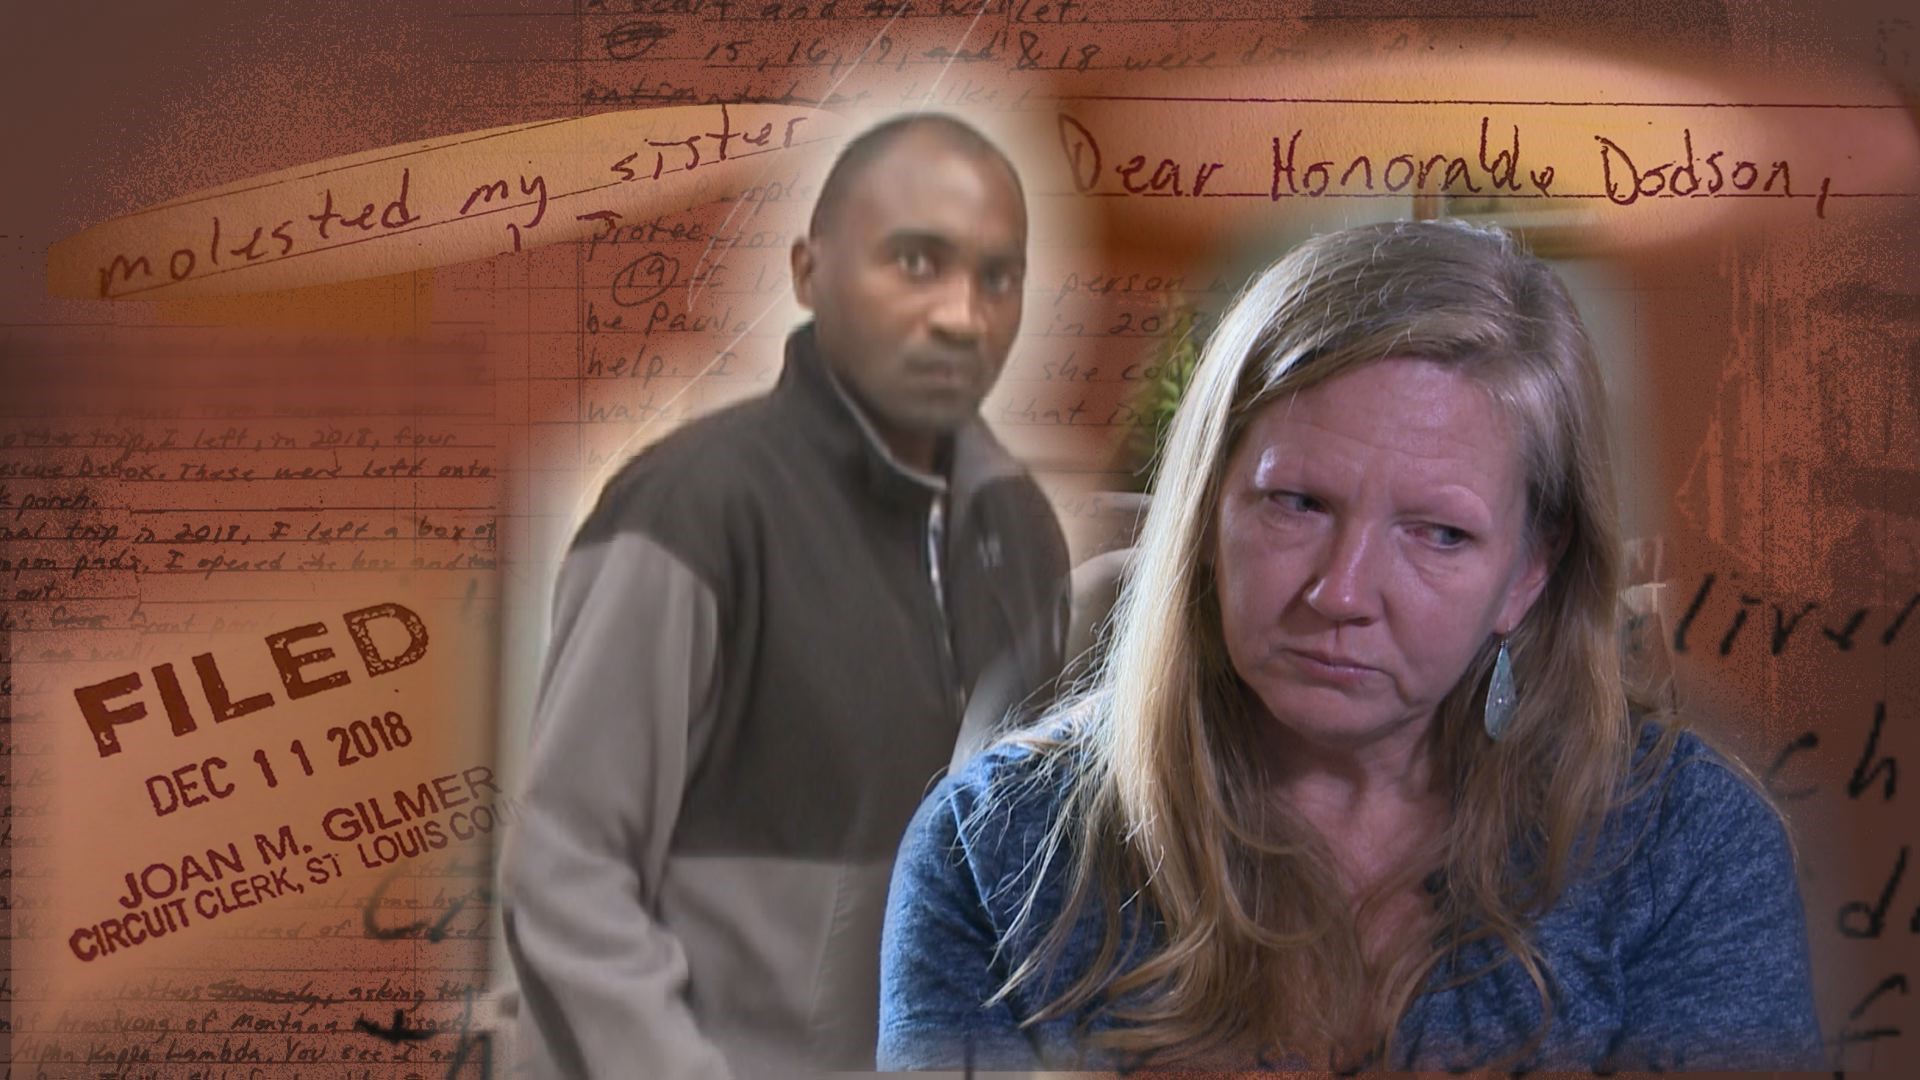 It all began when he started leaving gifts and drawings on her doorstep. Nine years later — he was confessing to serious crimes in letters to a judge.